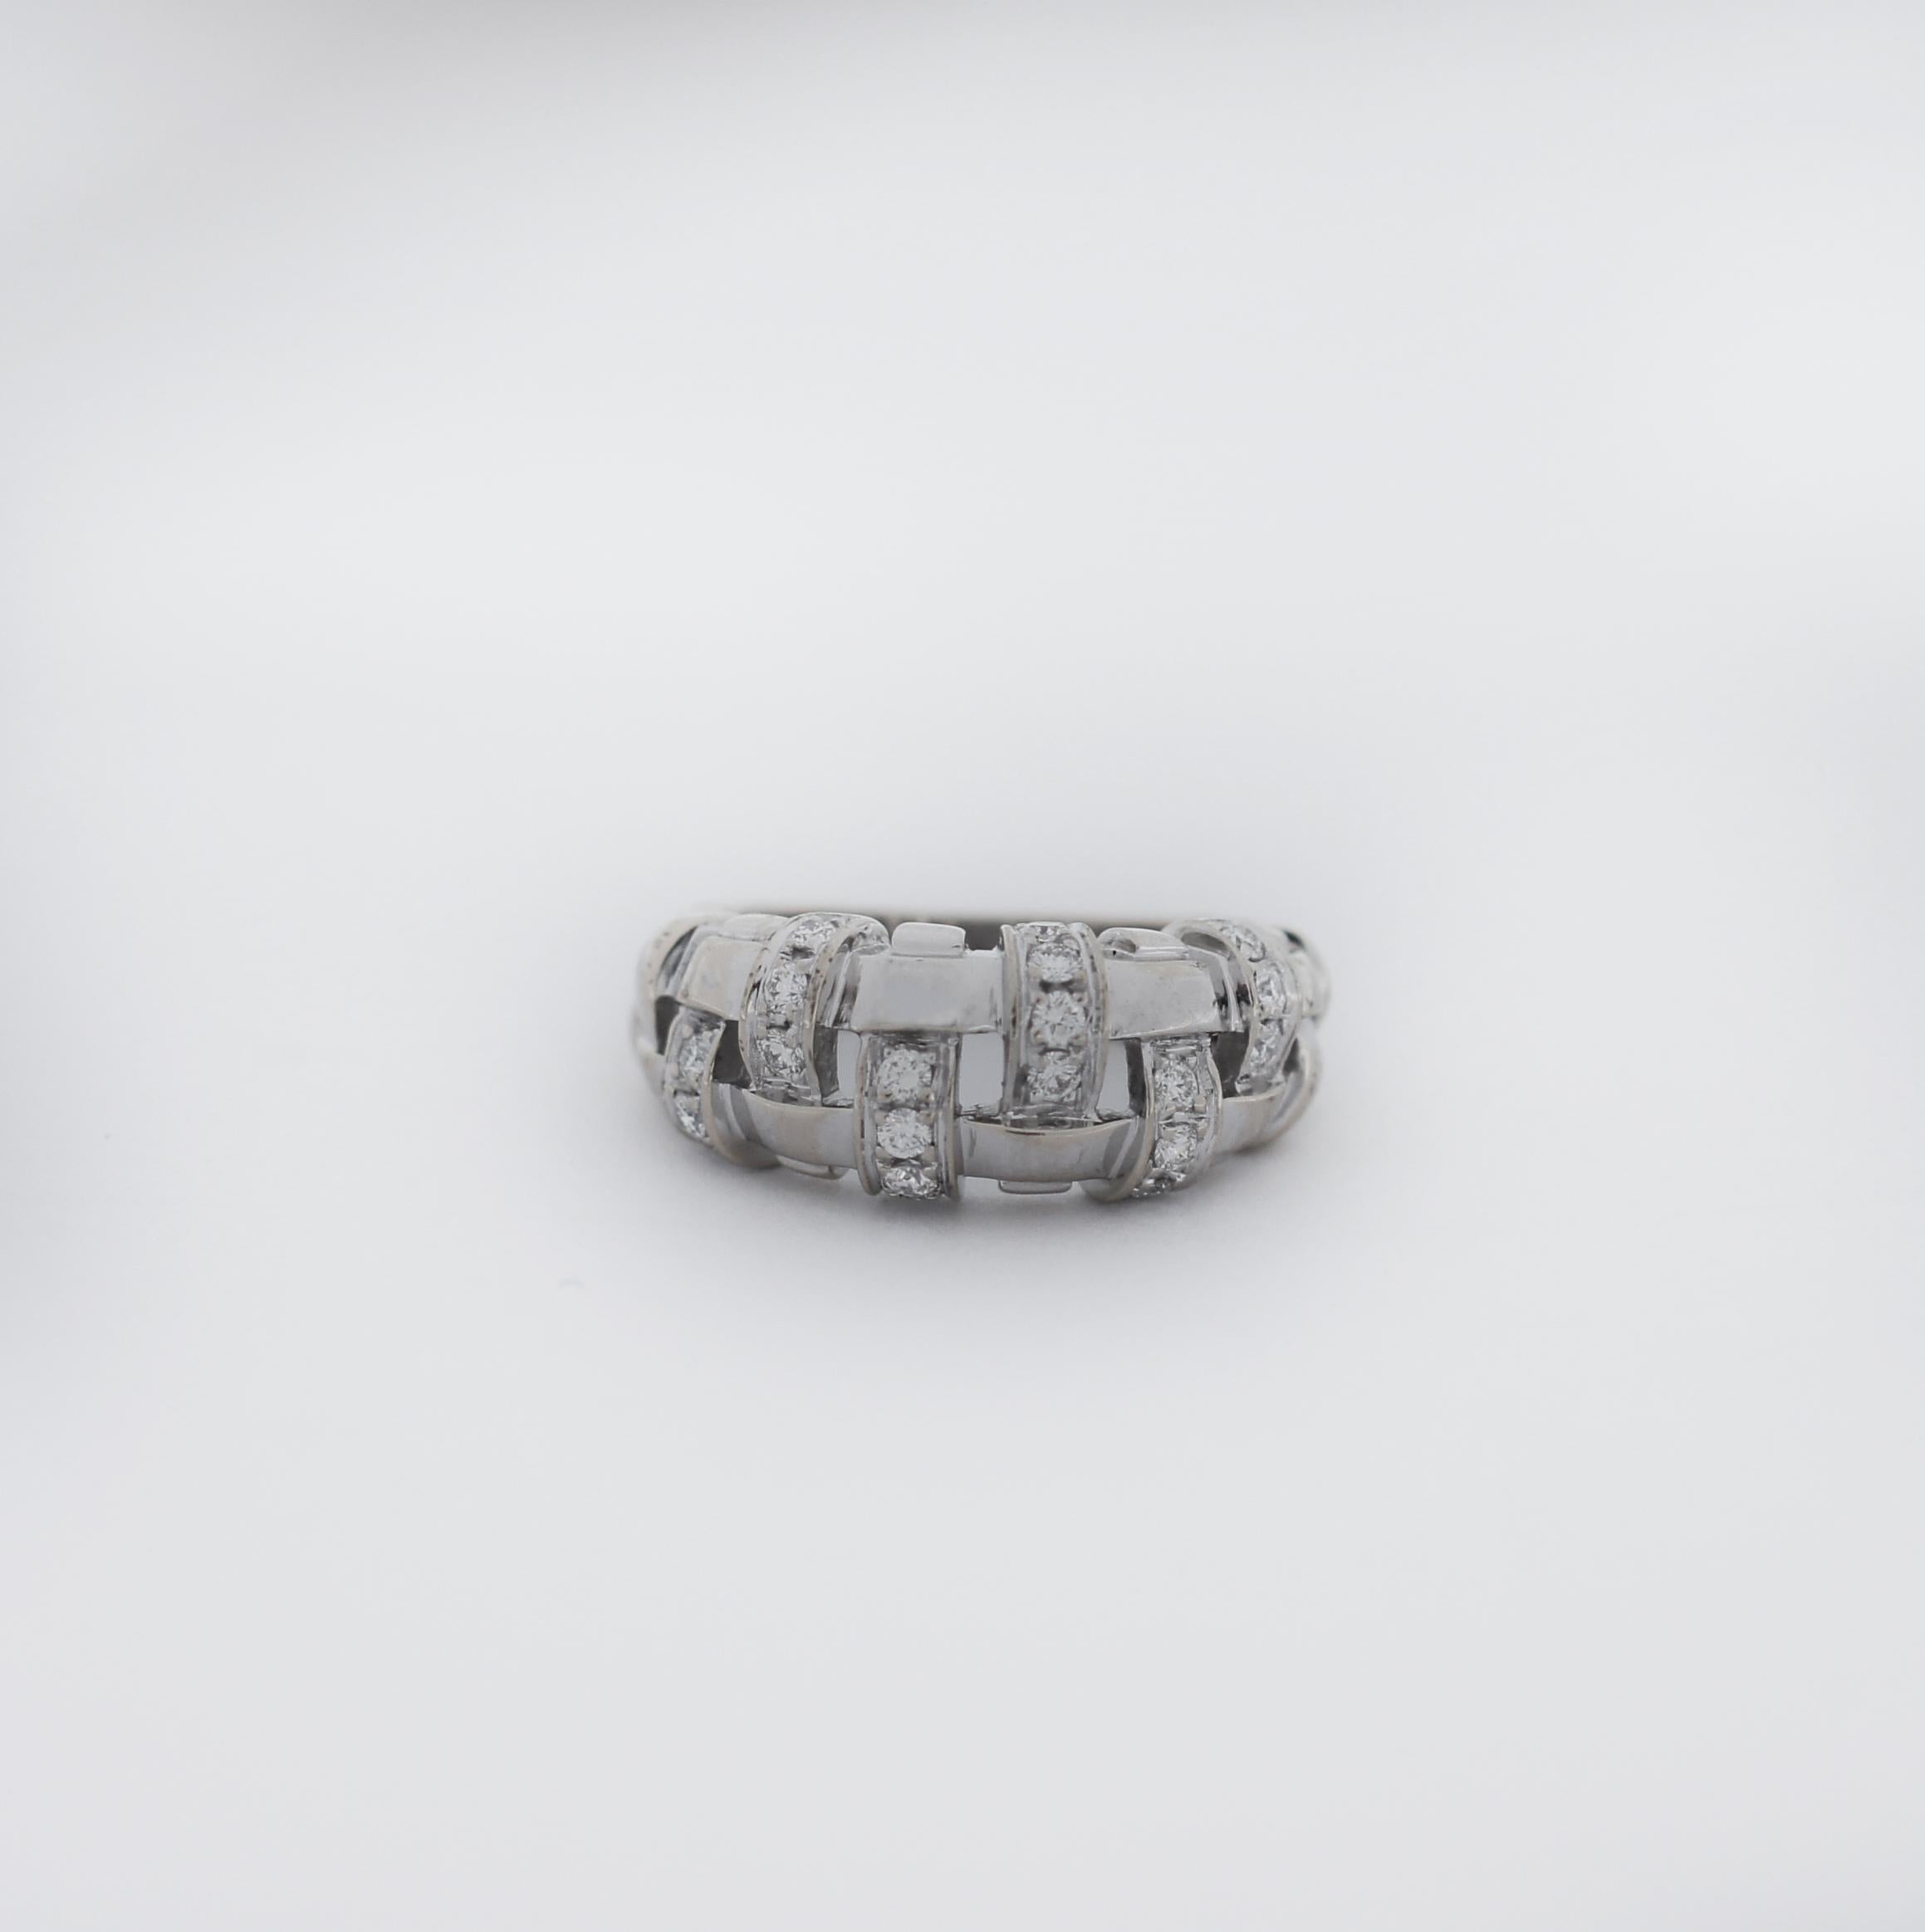 Tiffany & Co.
Vannerie
basket weave
18k white gold
Hallmark: T & Co ©2002 750 Italy
6.6 grams
Approx. measurements:
-Width at top: 9mm
-Height at top: 5mm
-Width at Bottom: 4.03mm
Ring Size 5.5
In great looking condition
wear consistent with time